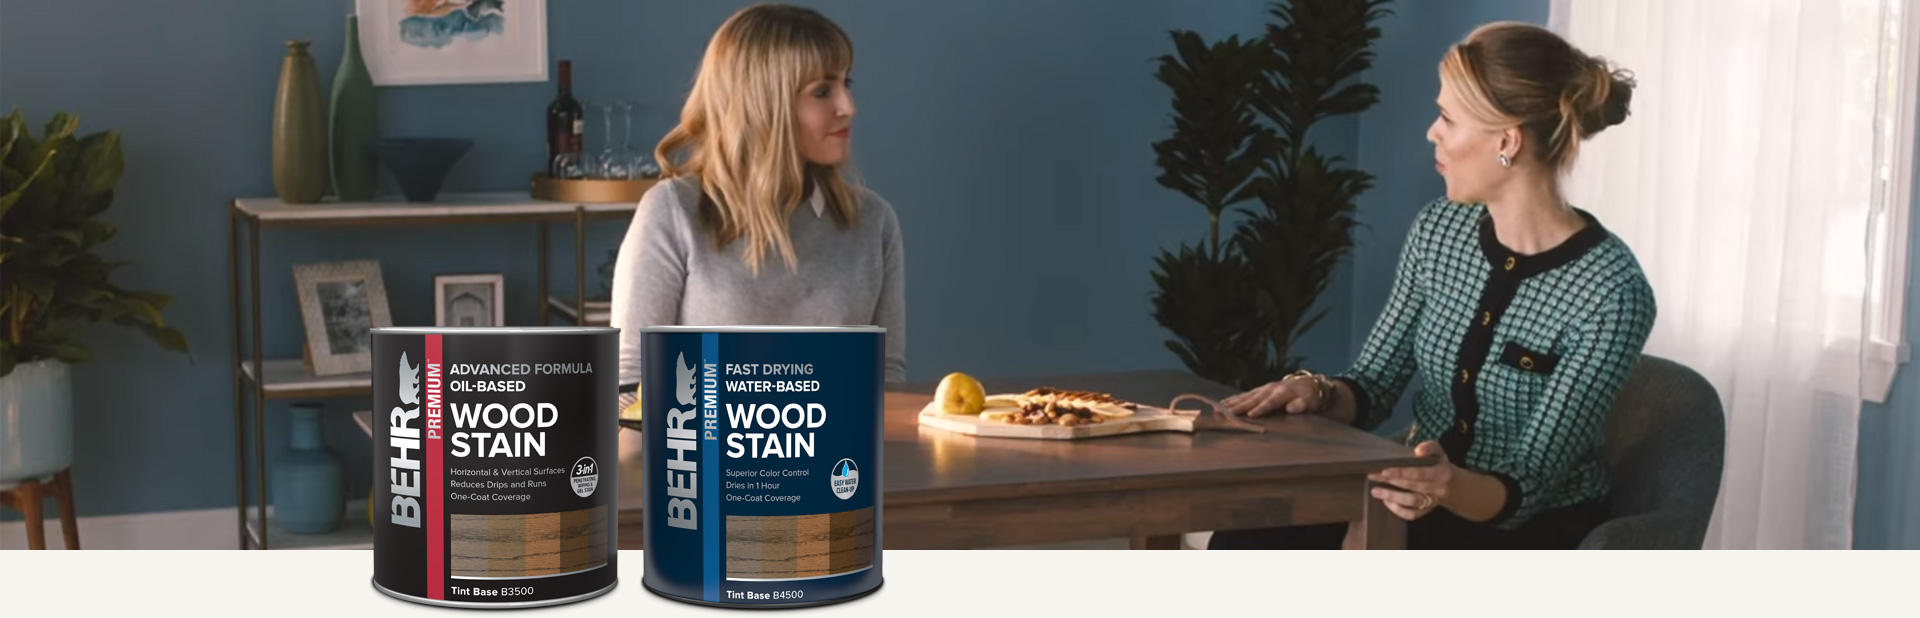 Two ladies sitting at stained dining table with Behr interior wood stain products in foreground